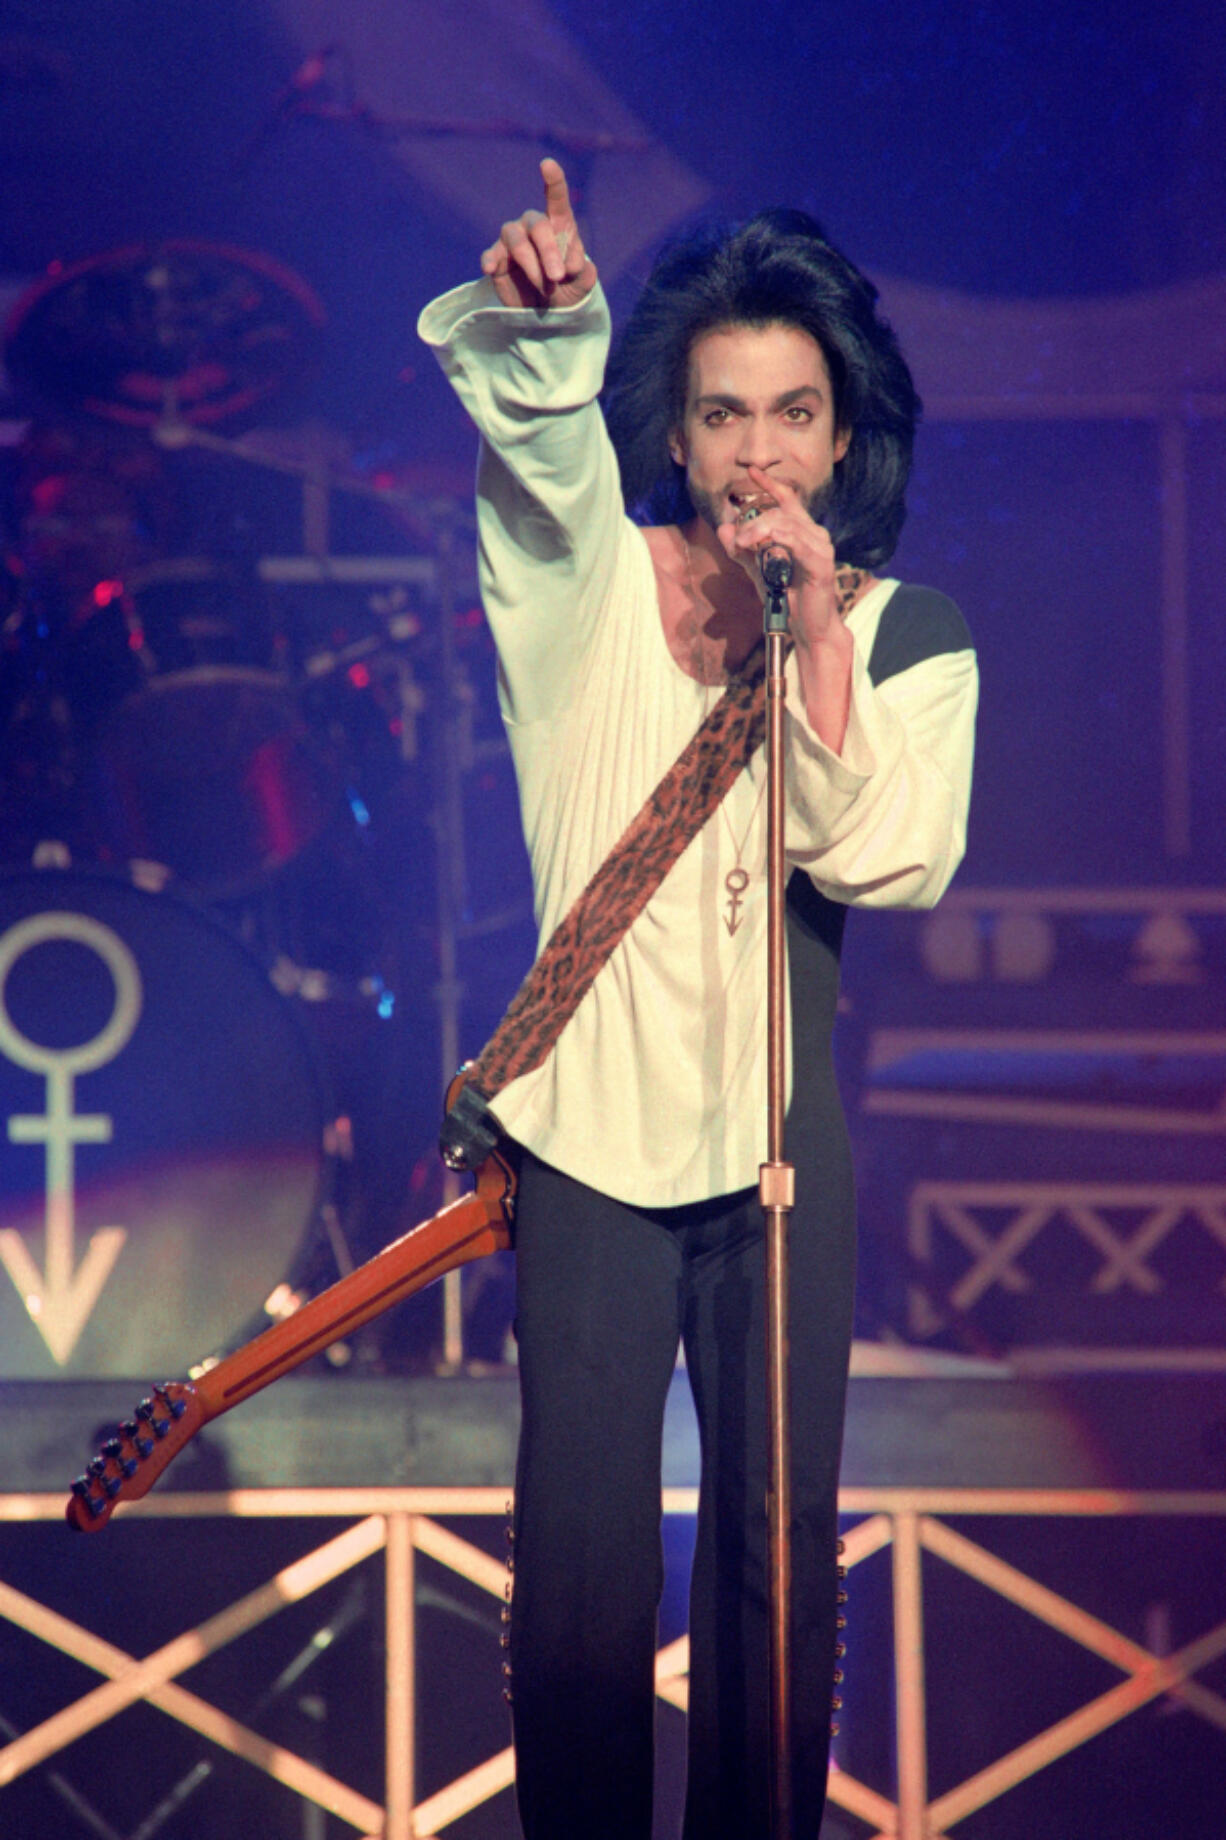 Prince performs during his concert at the Parc des Princes stadium in Paris on June 16, 1990.